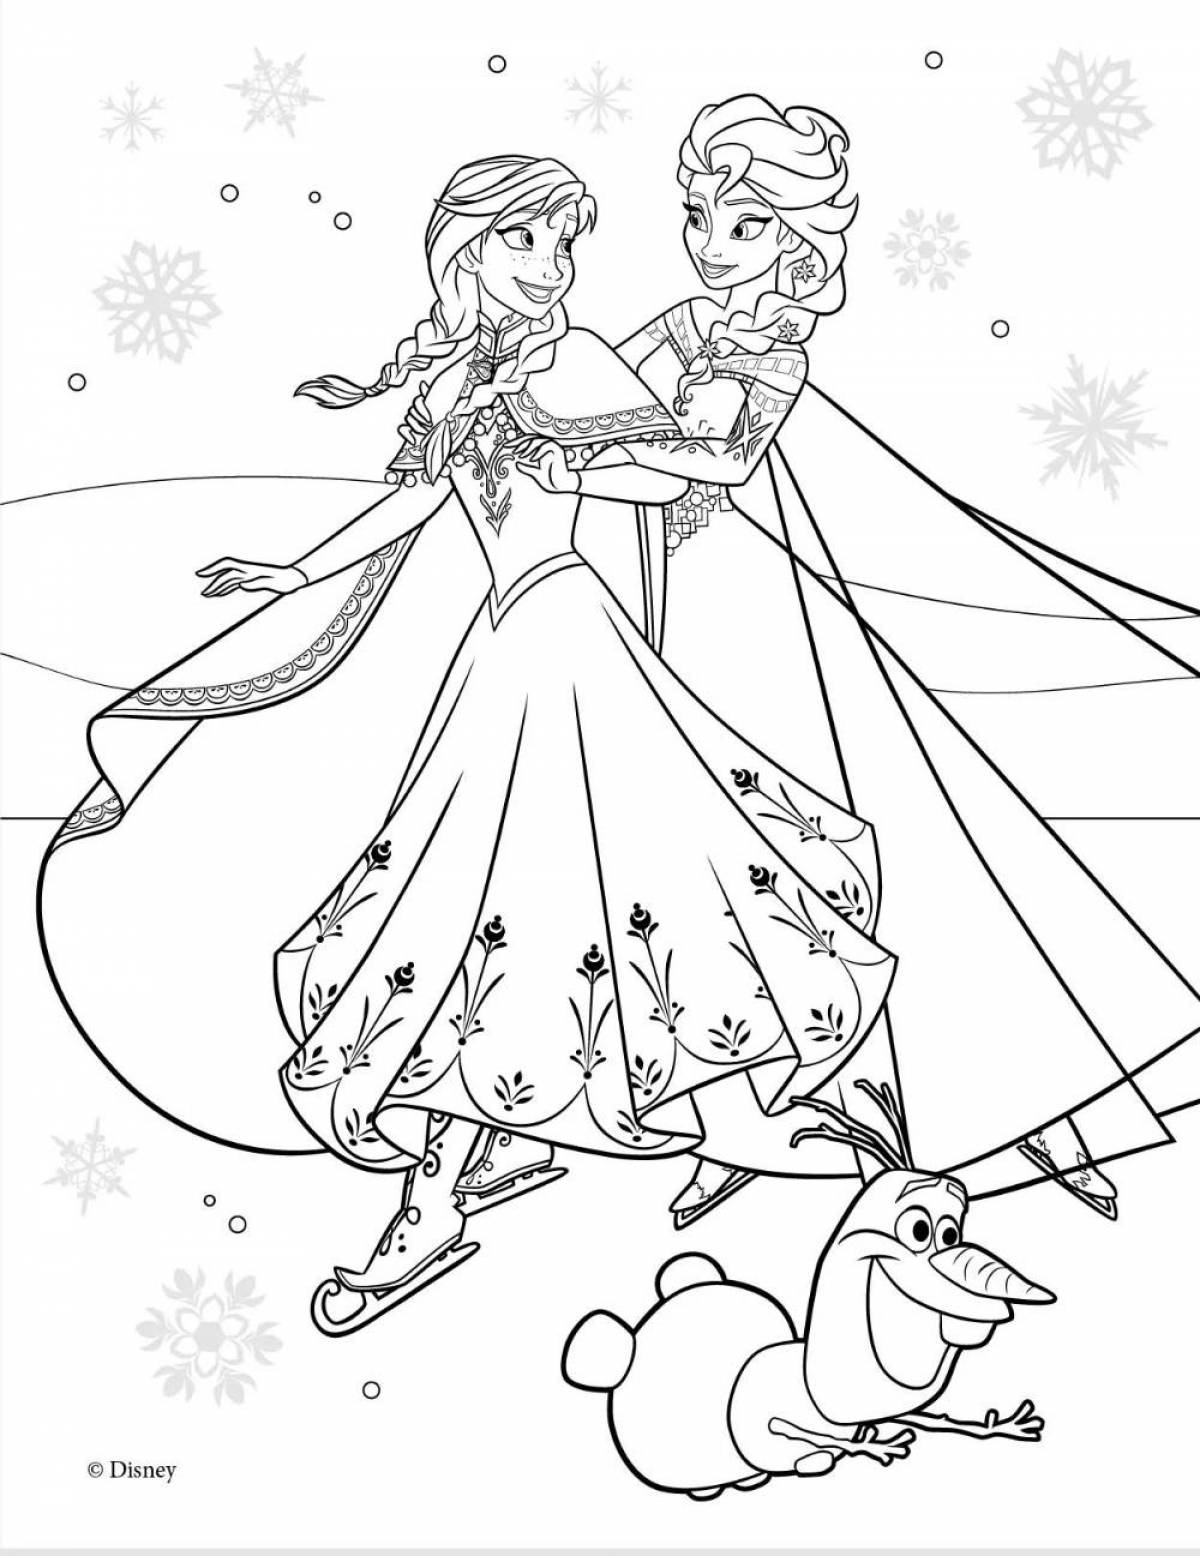 Cute Frozen coloring book for kids